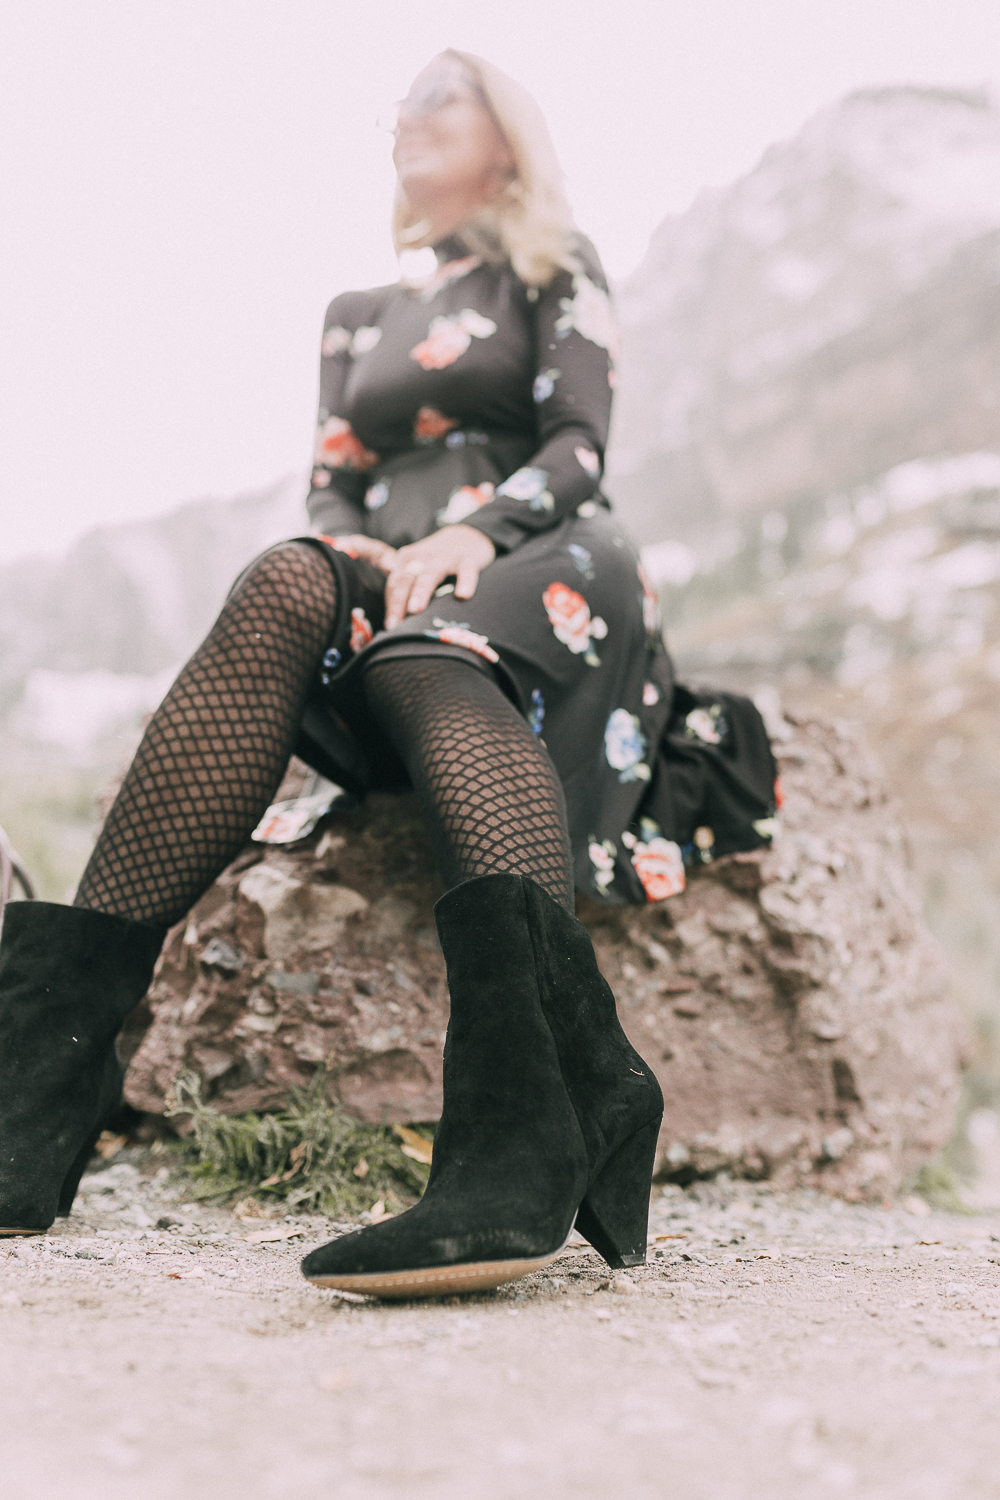 woman sitting on rock wearing regina vince camuto black suede booties and black print floral dress